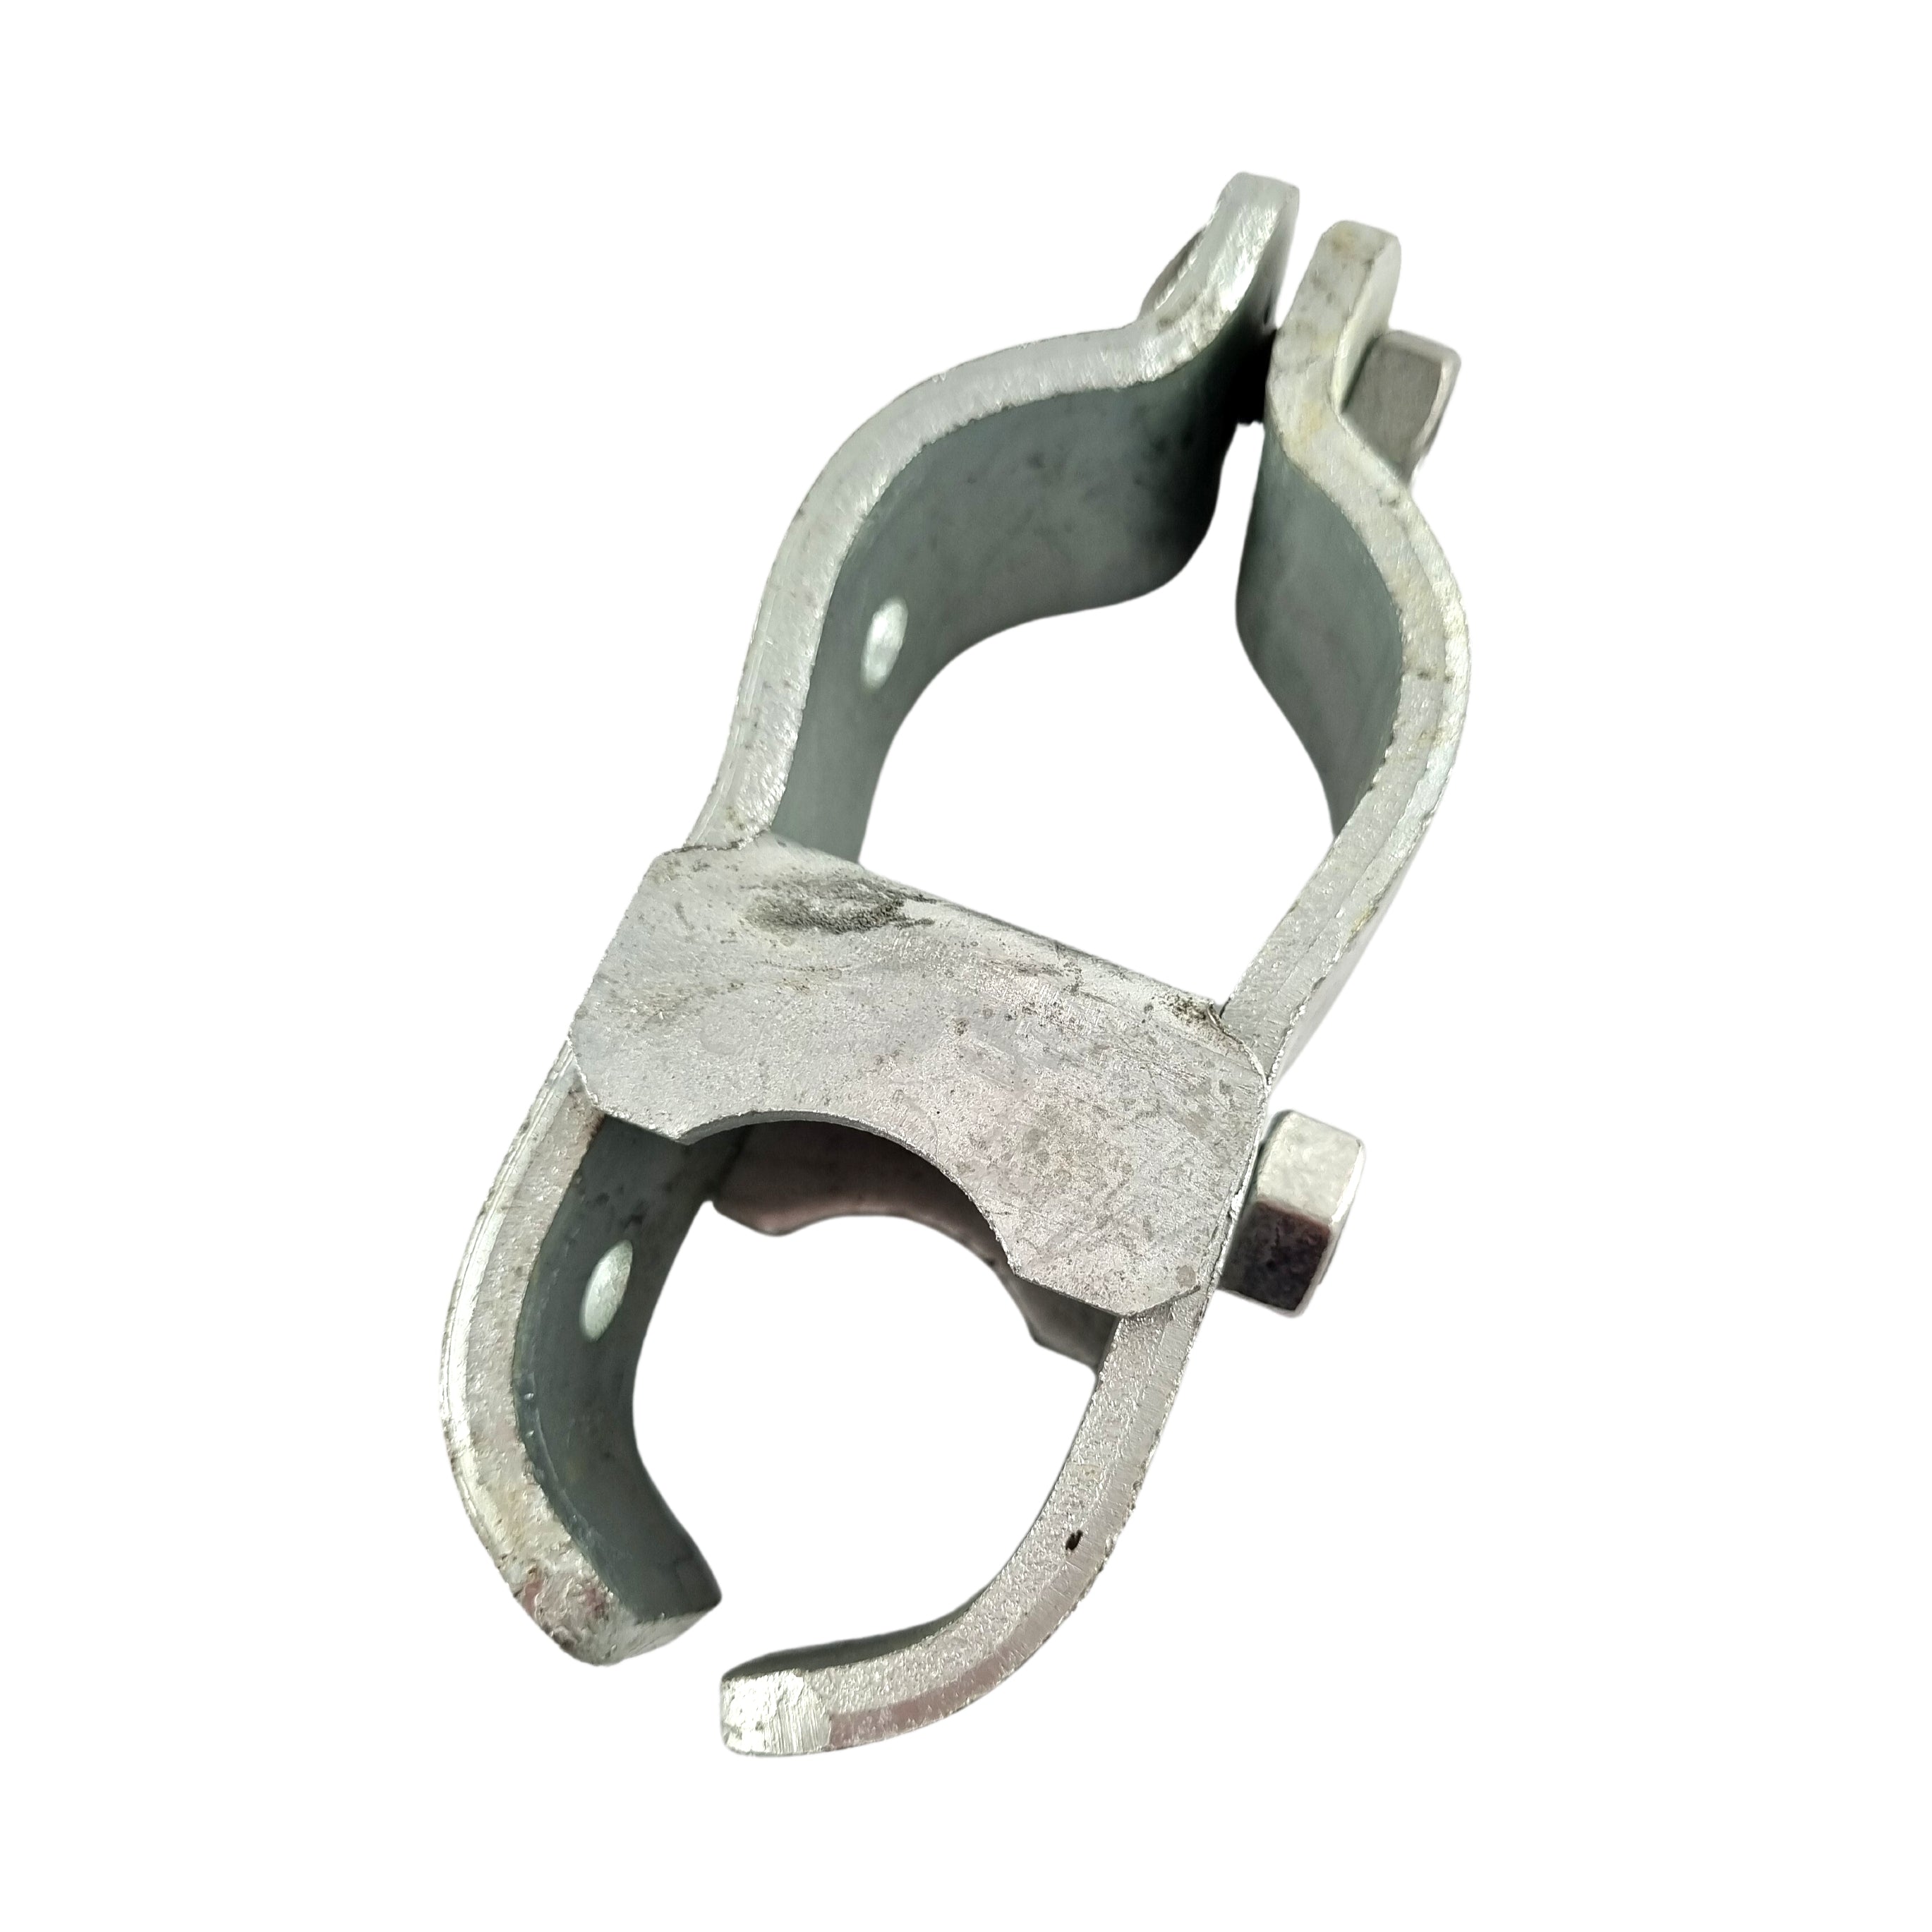 Two Part Hinge + Attachment - Galvanised. Various sizes. Shop Fence & Gate Fittings online at chain.com.au. Shipping Australia wide.